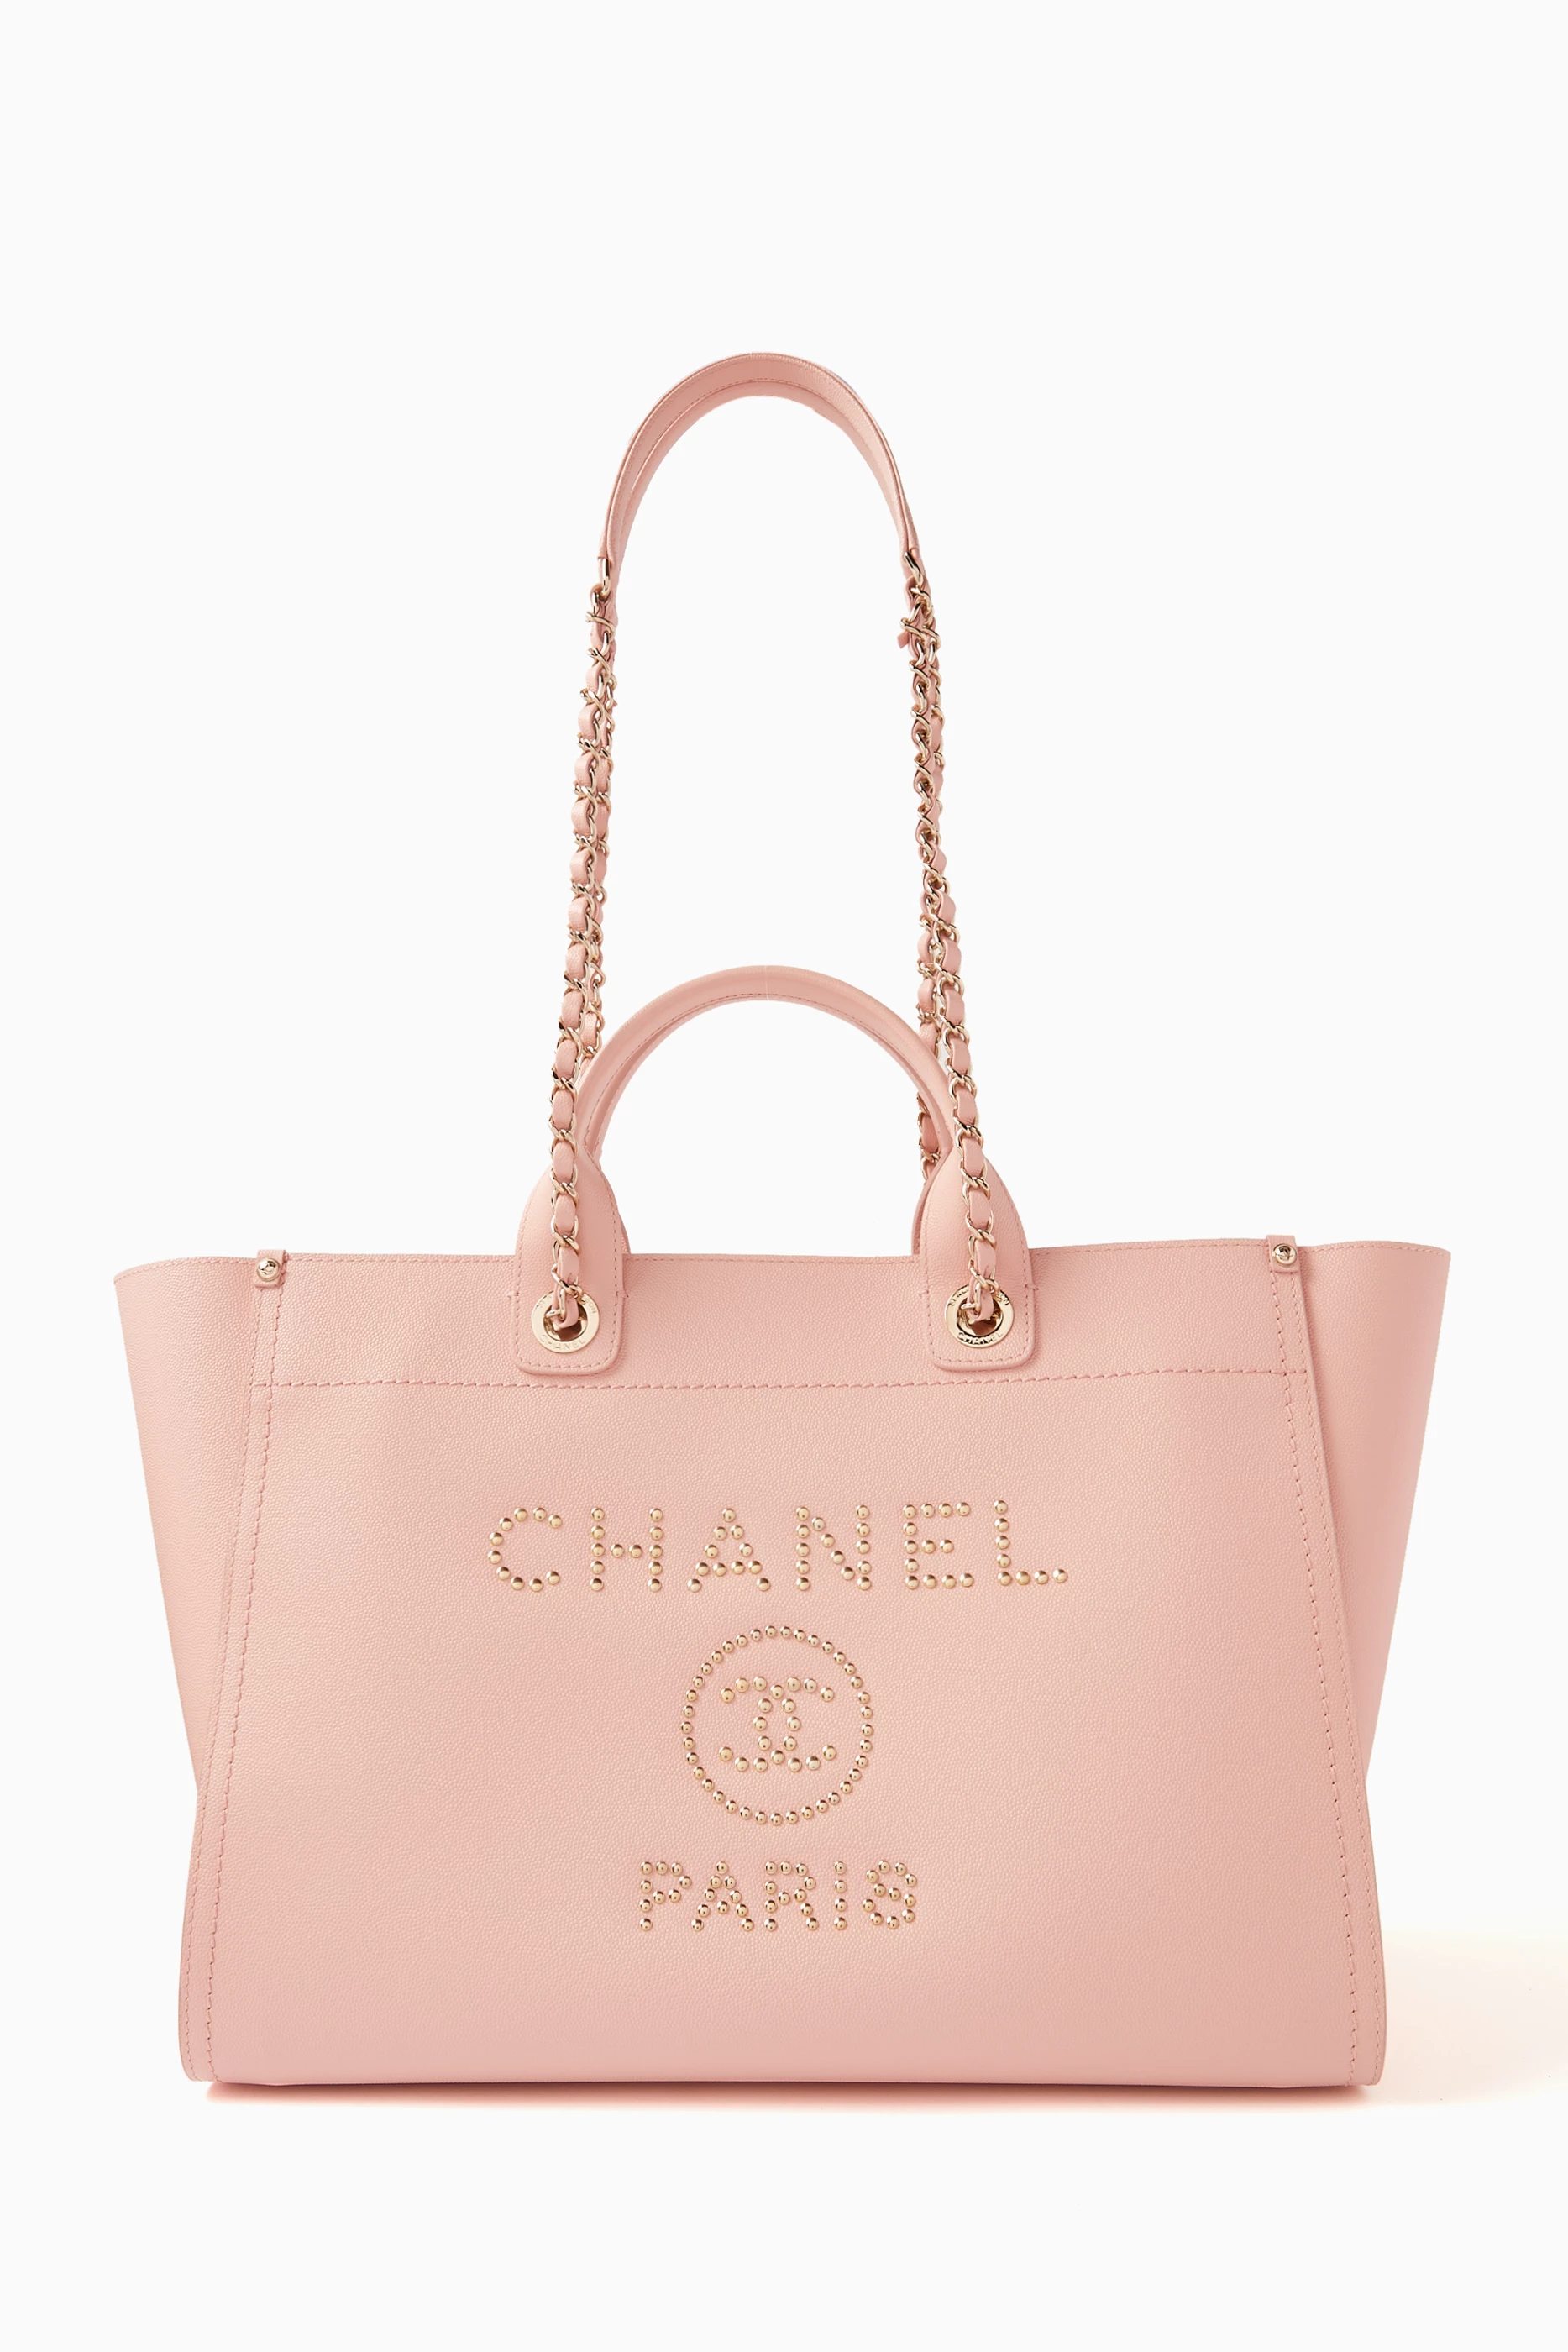 chanel large deauville tote